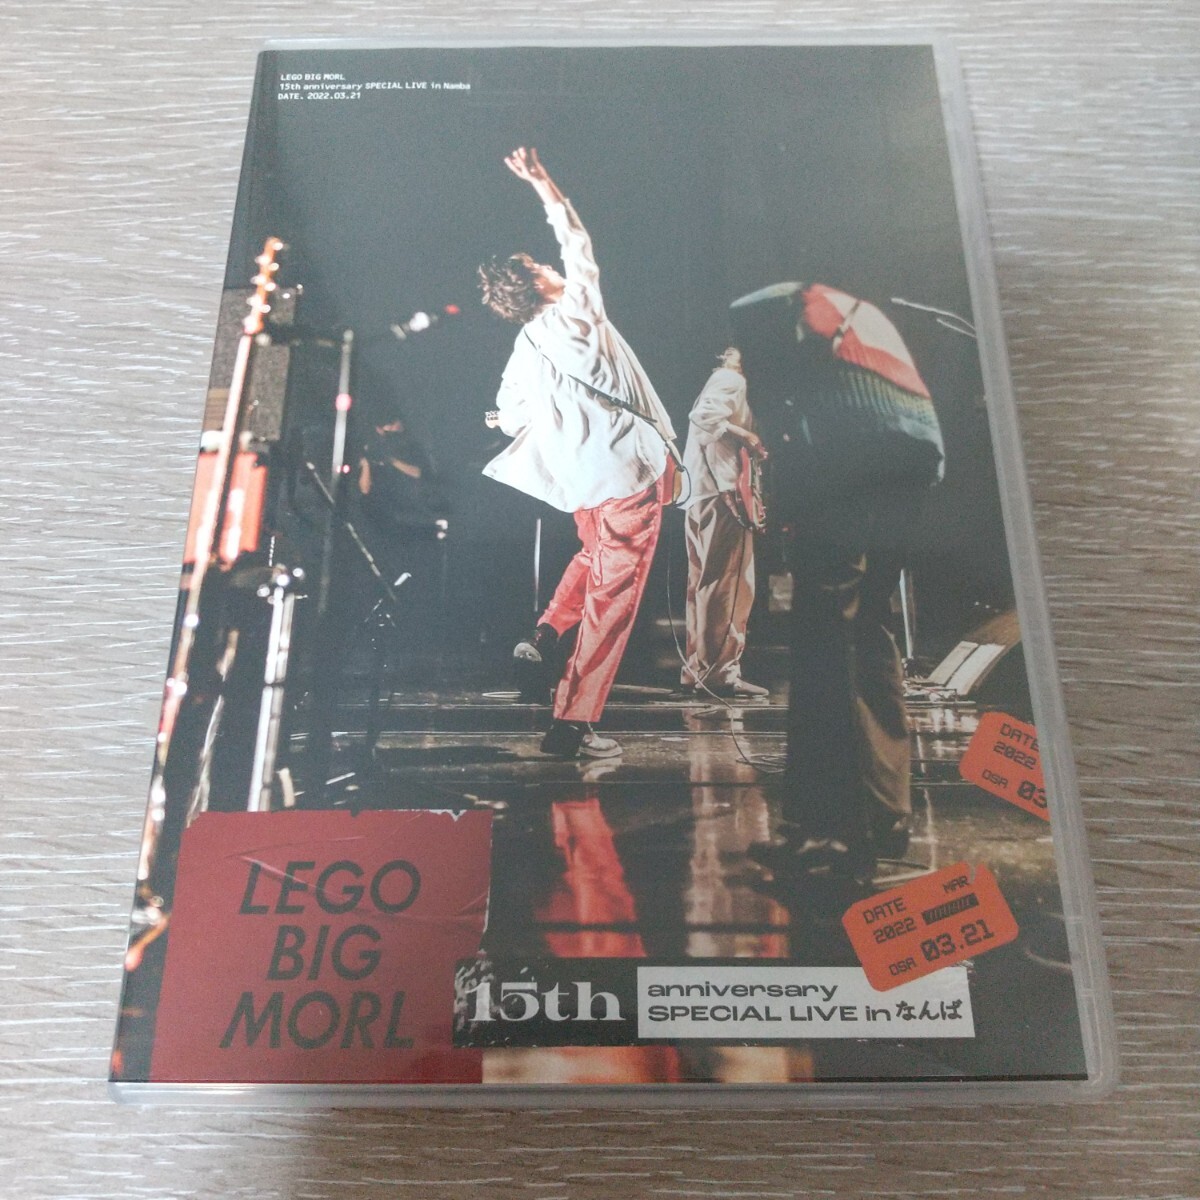 LEGO BIG MORL 15th anniversary SPECIAL LIVE in なんば DVD_画像1